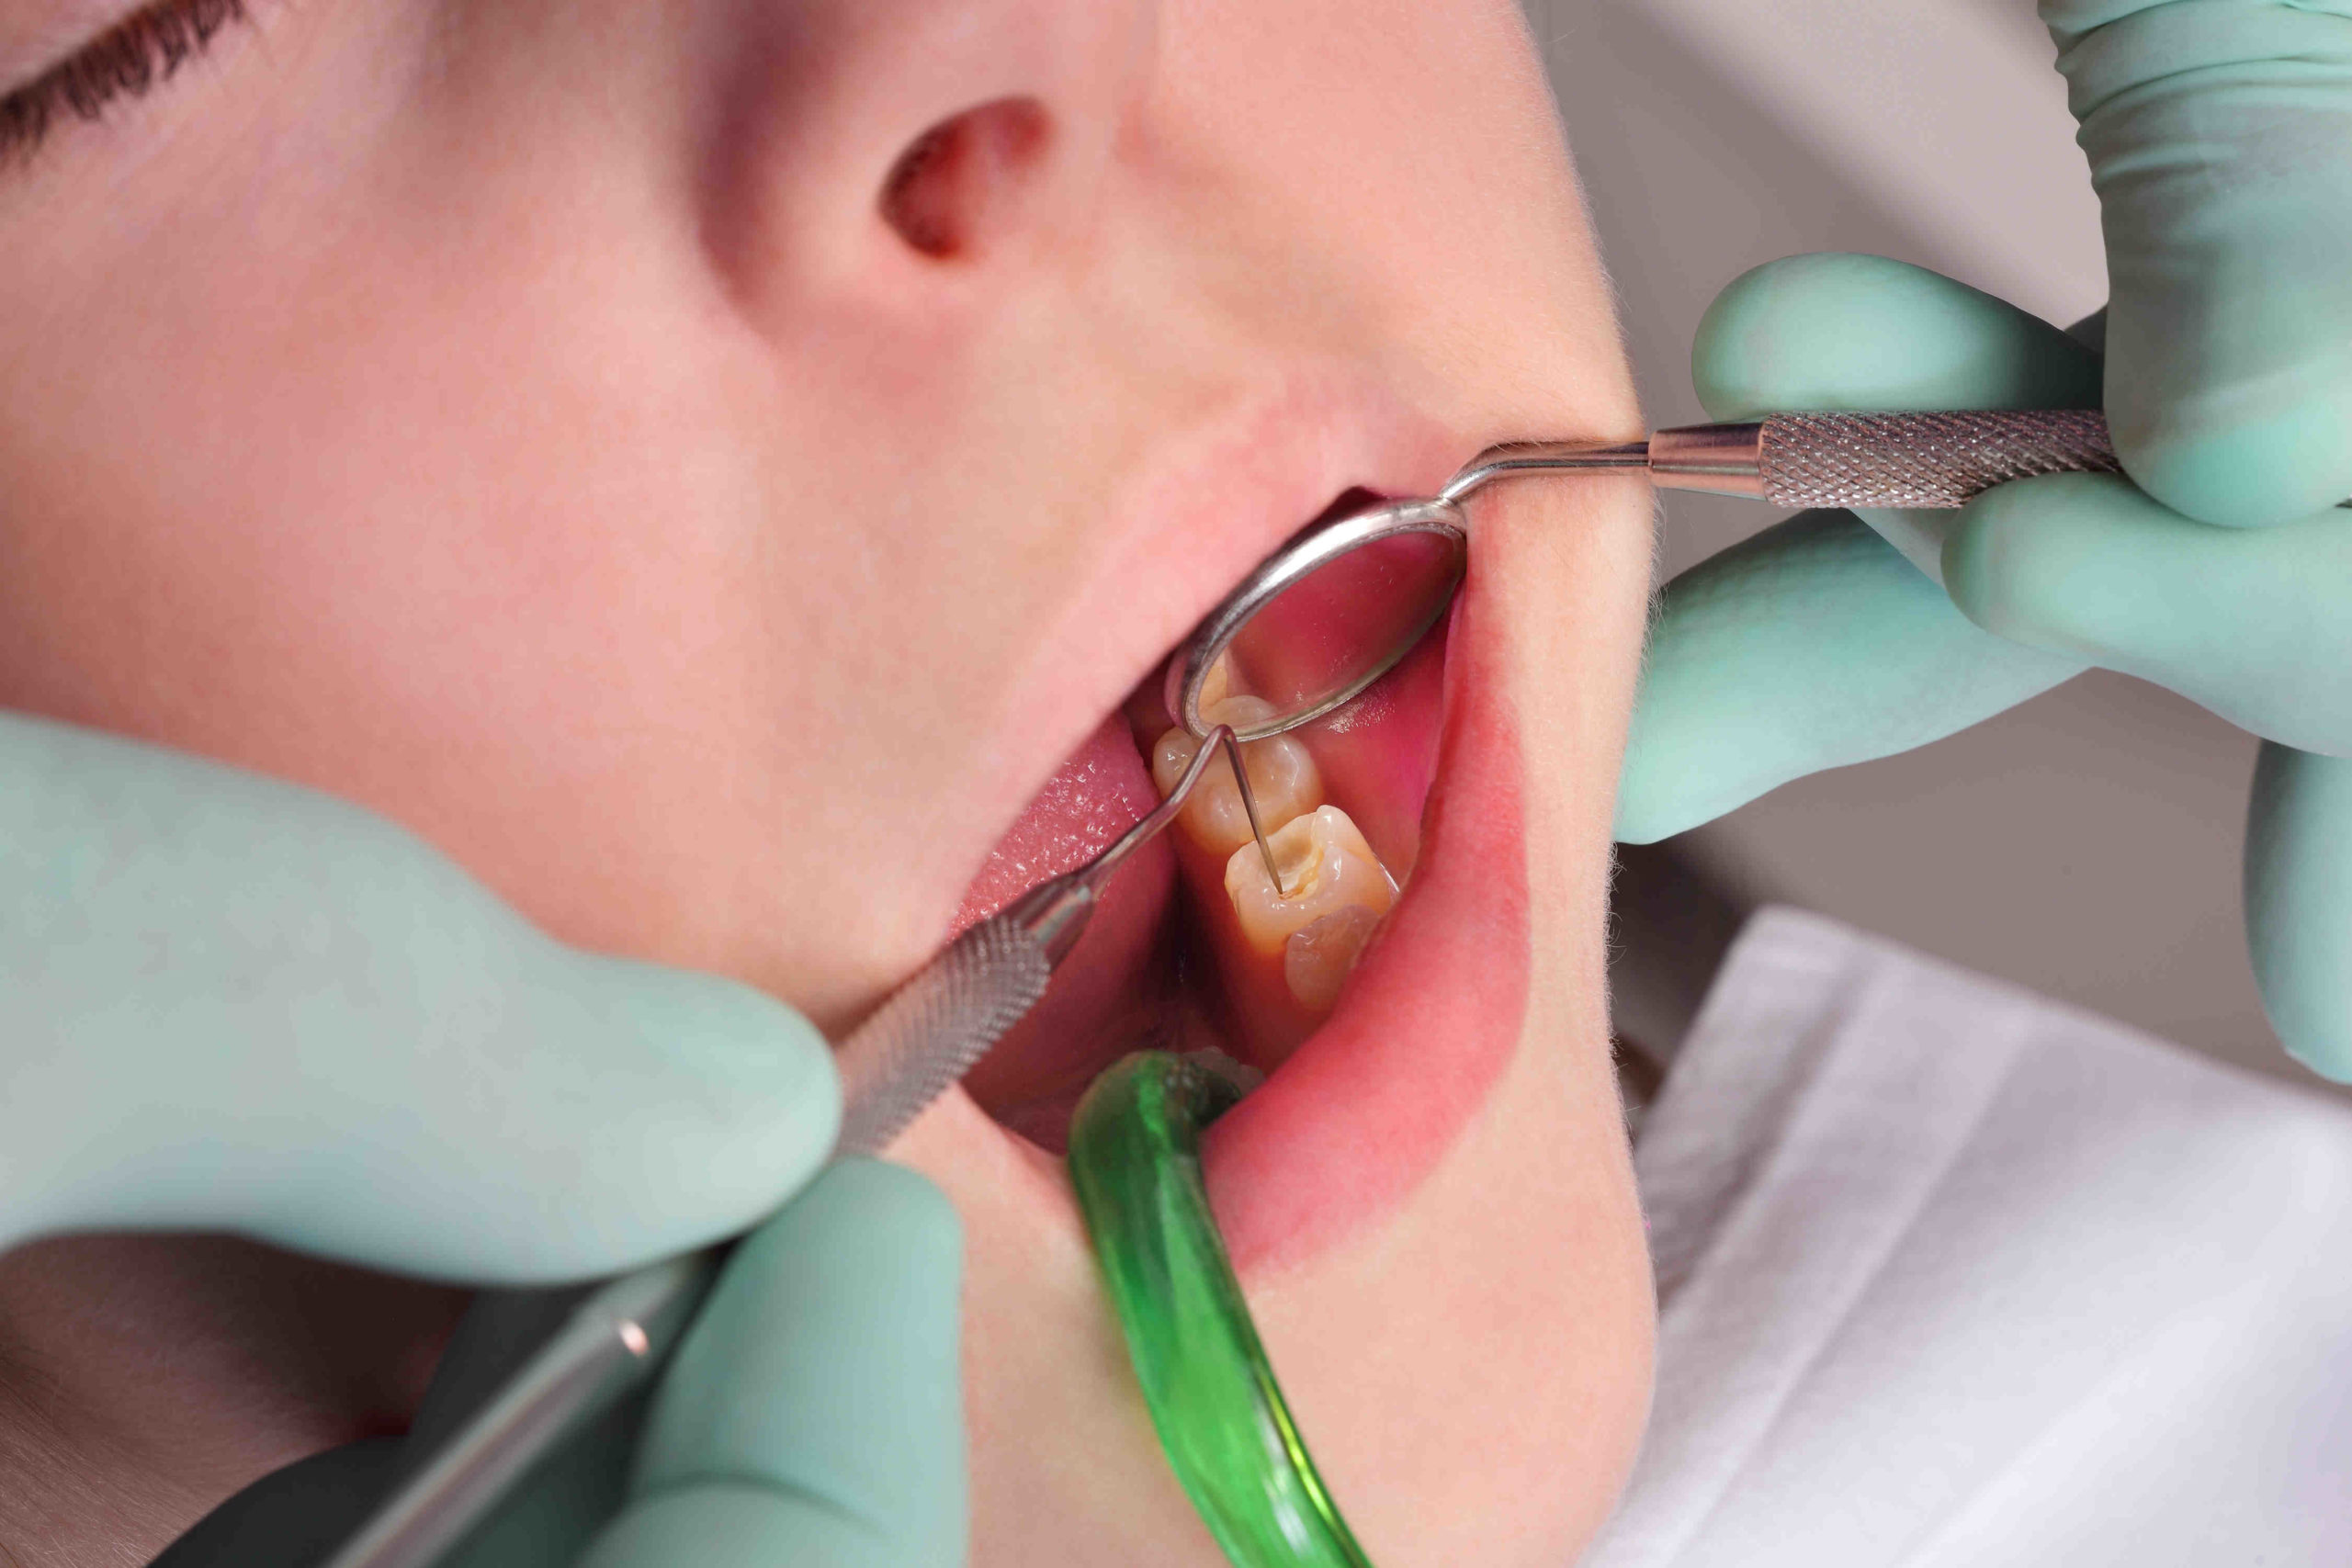 How much should a cavity filling cost?